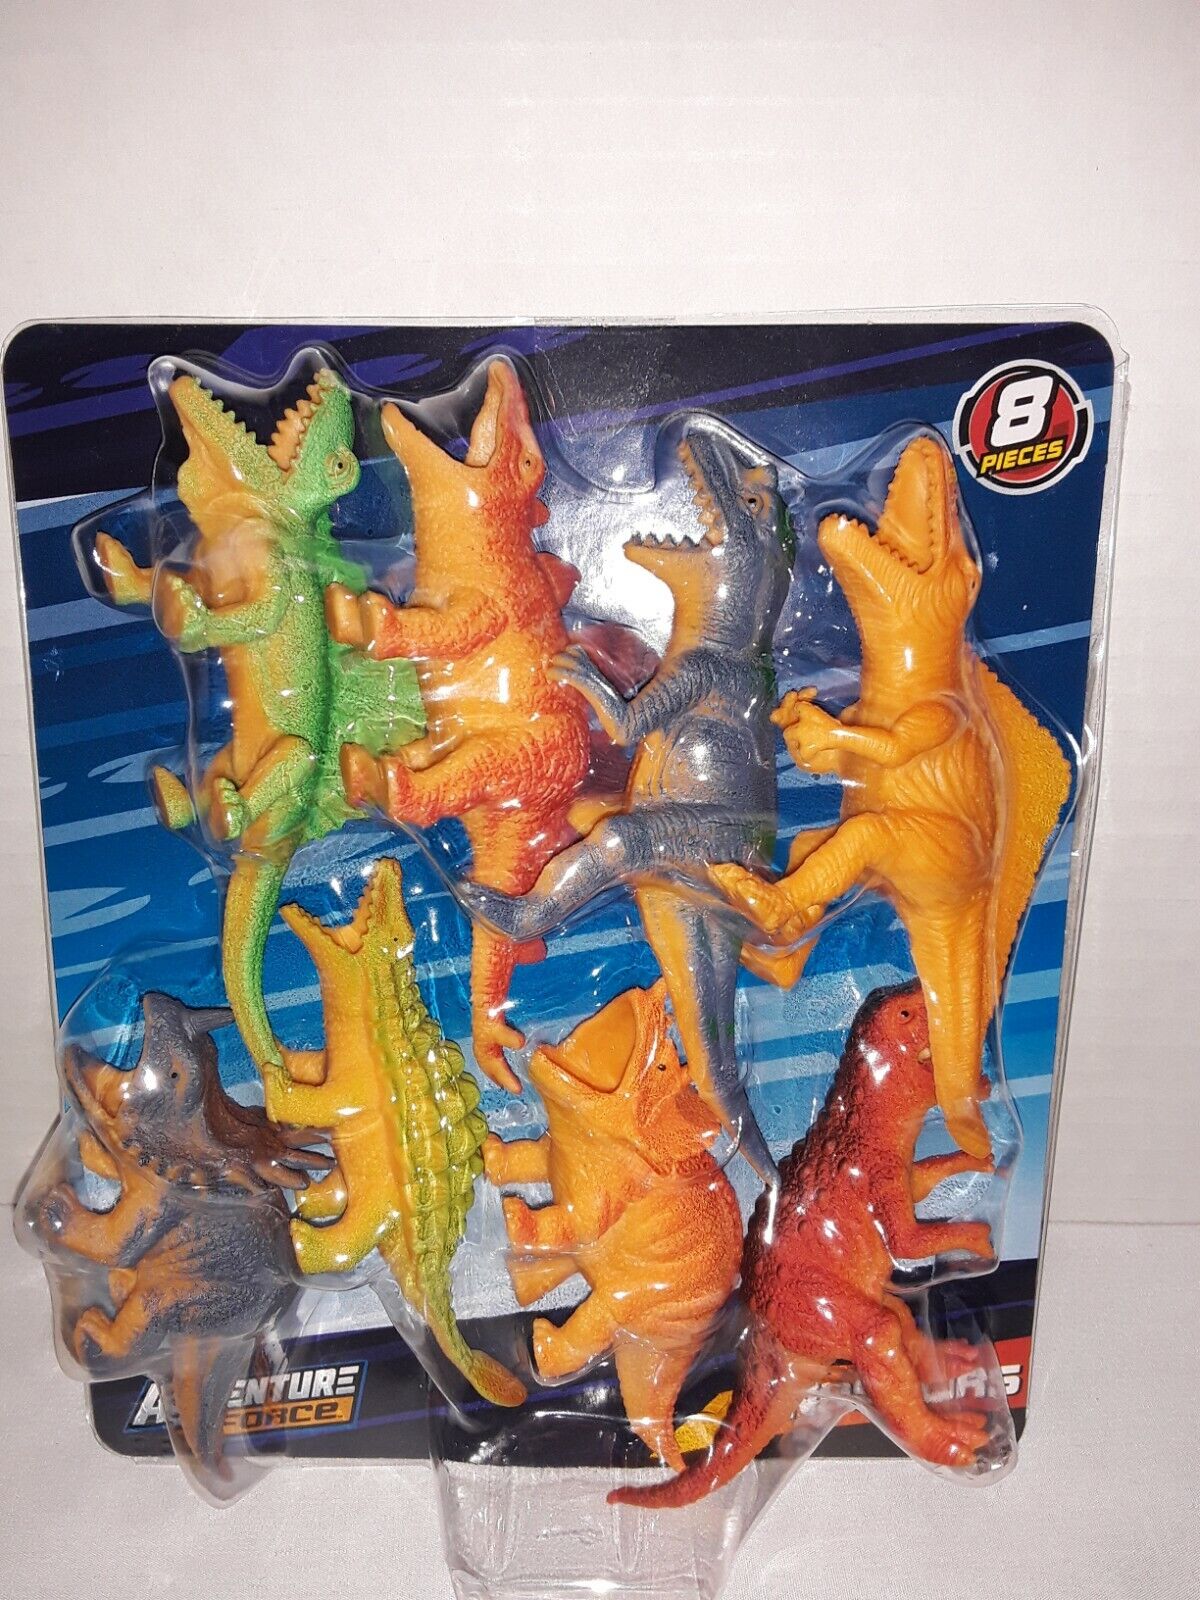 Adventure Force Toys Sea Animals and Dinosaurs 8 Piece Sets Lot of 2 New Unbranded - фотография #2